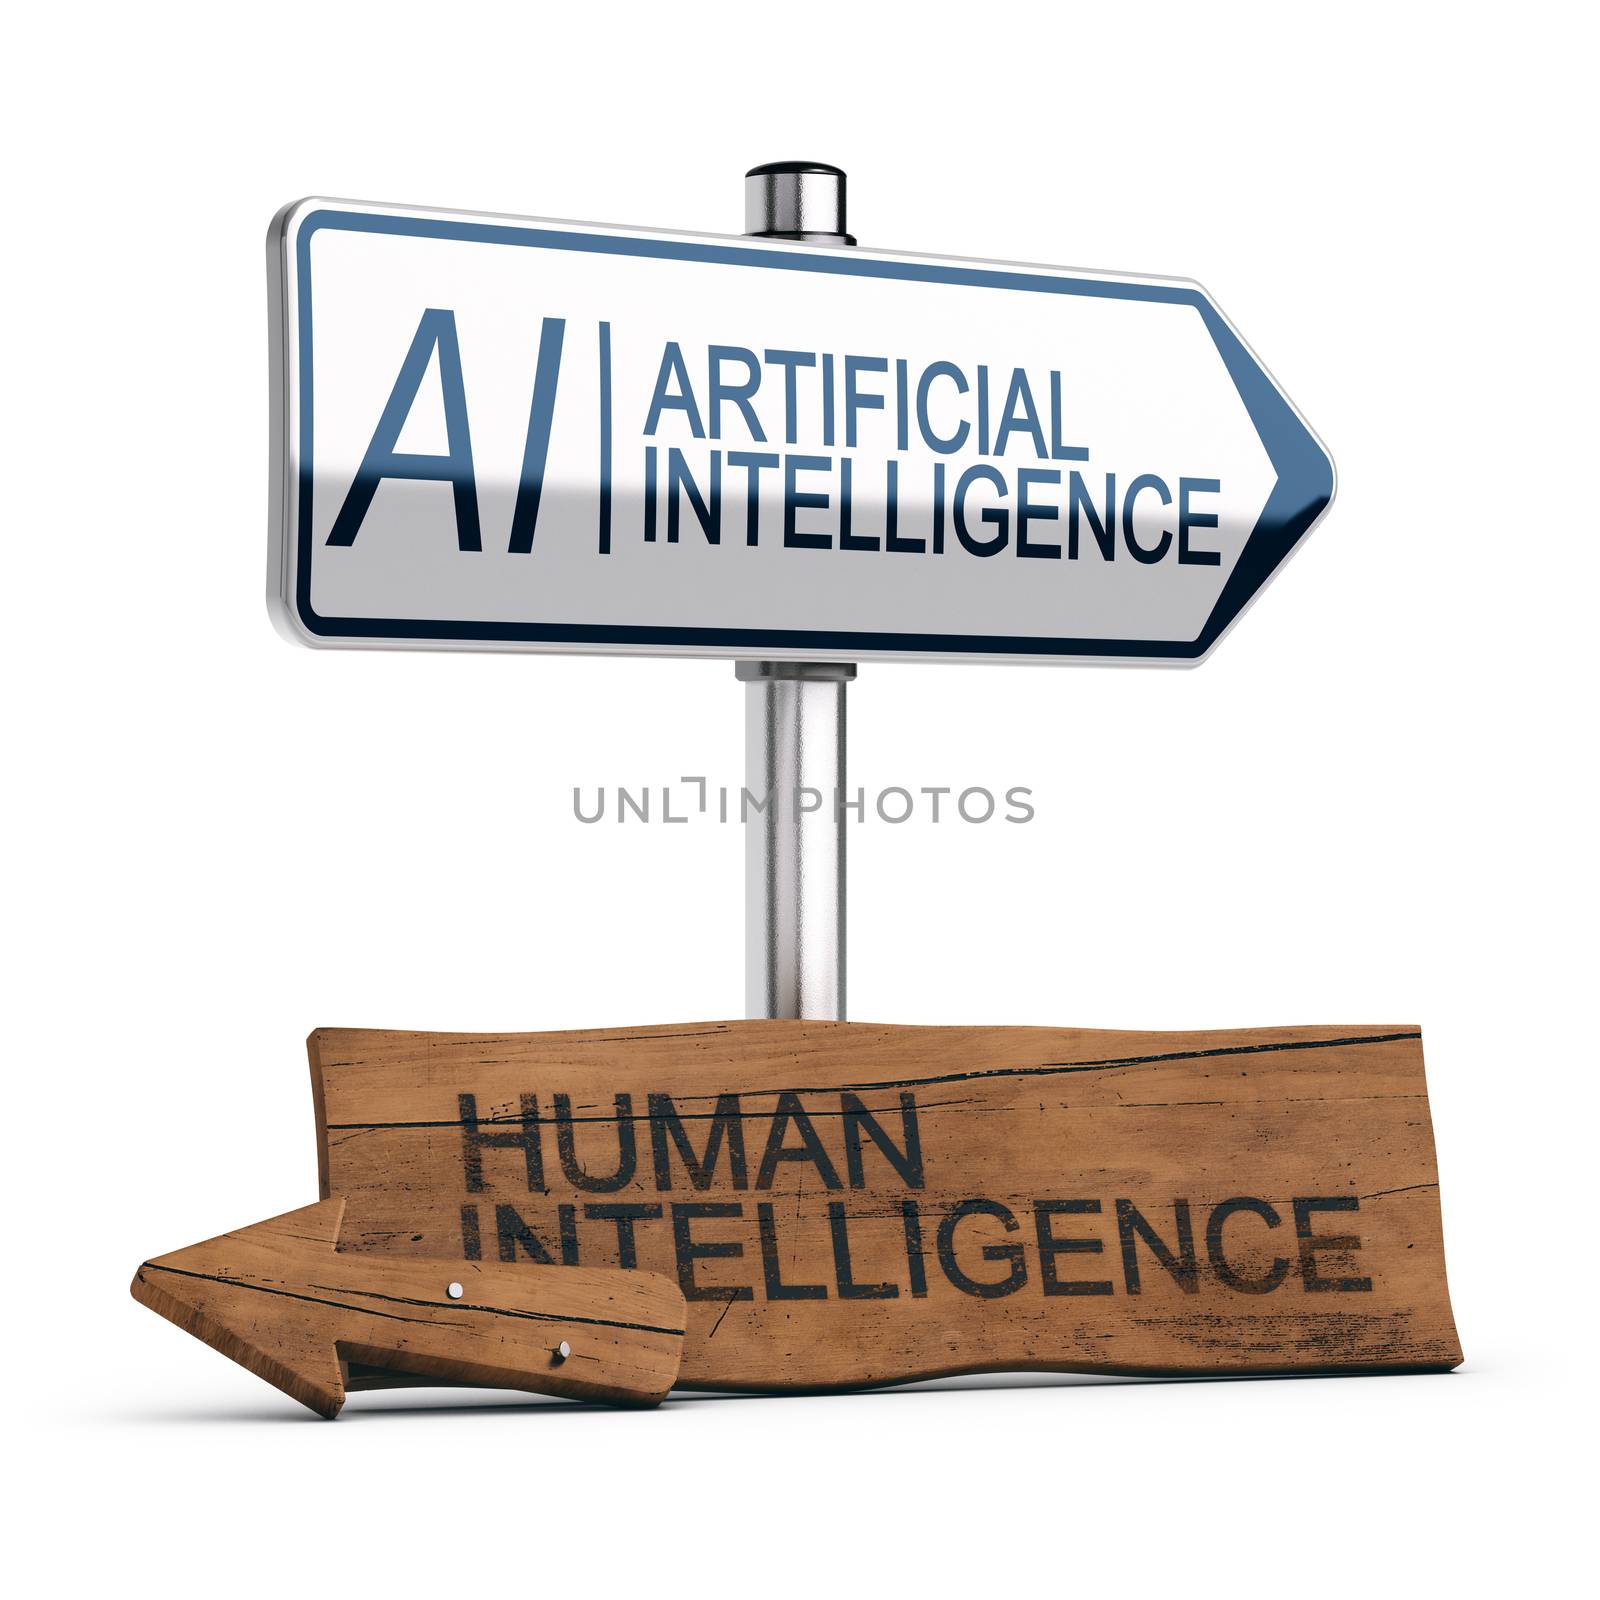 AI, Artificial Intelligence Will Surpass Human Intelligence by Olivier-Le-Moal